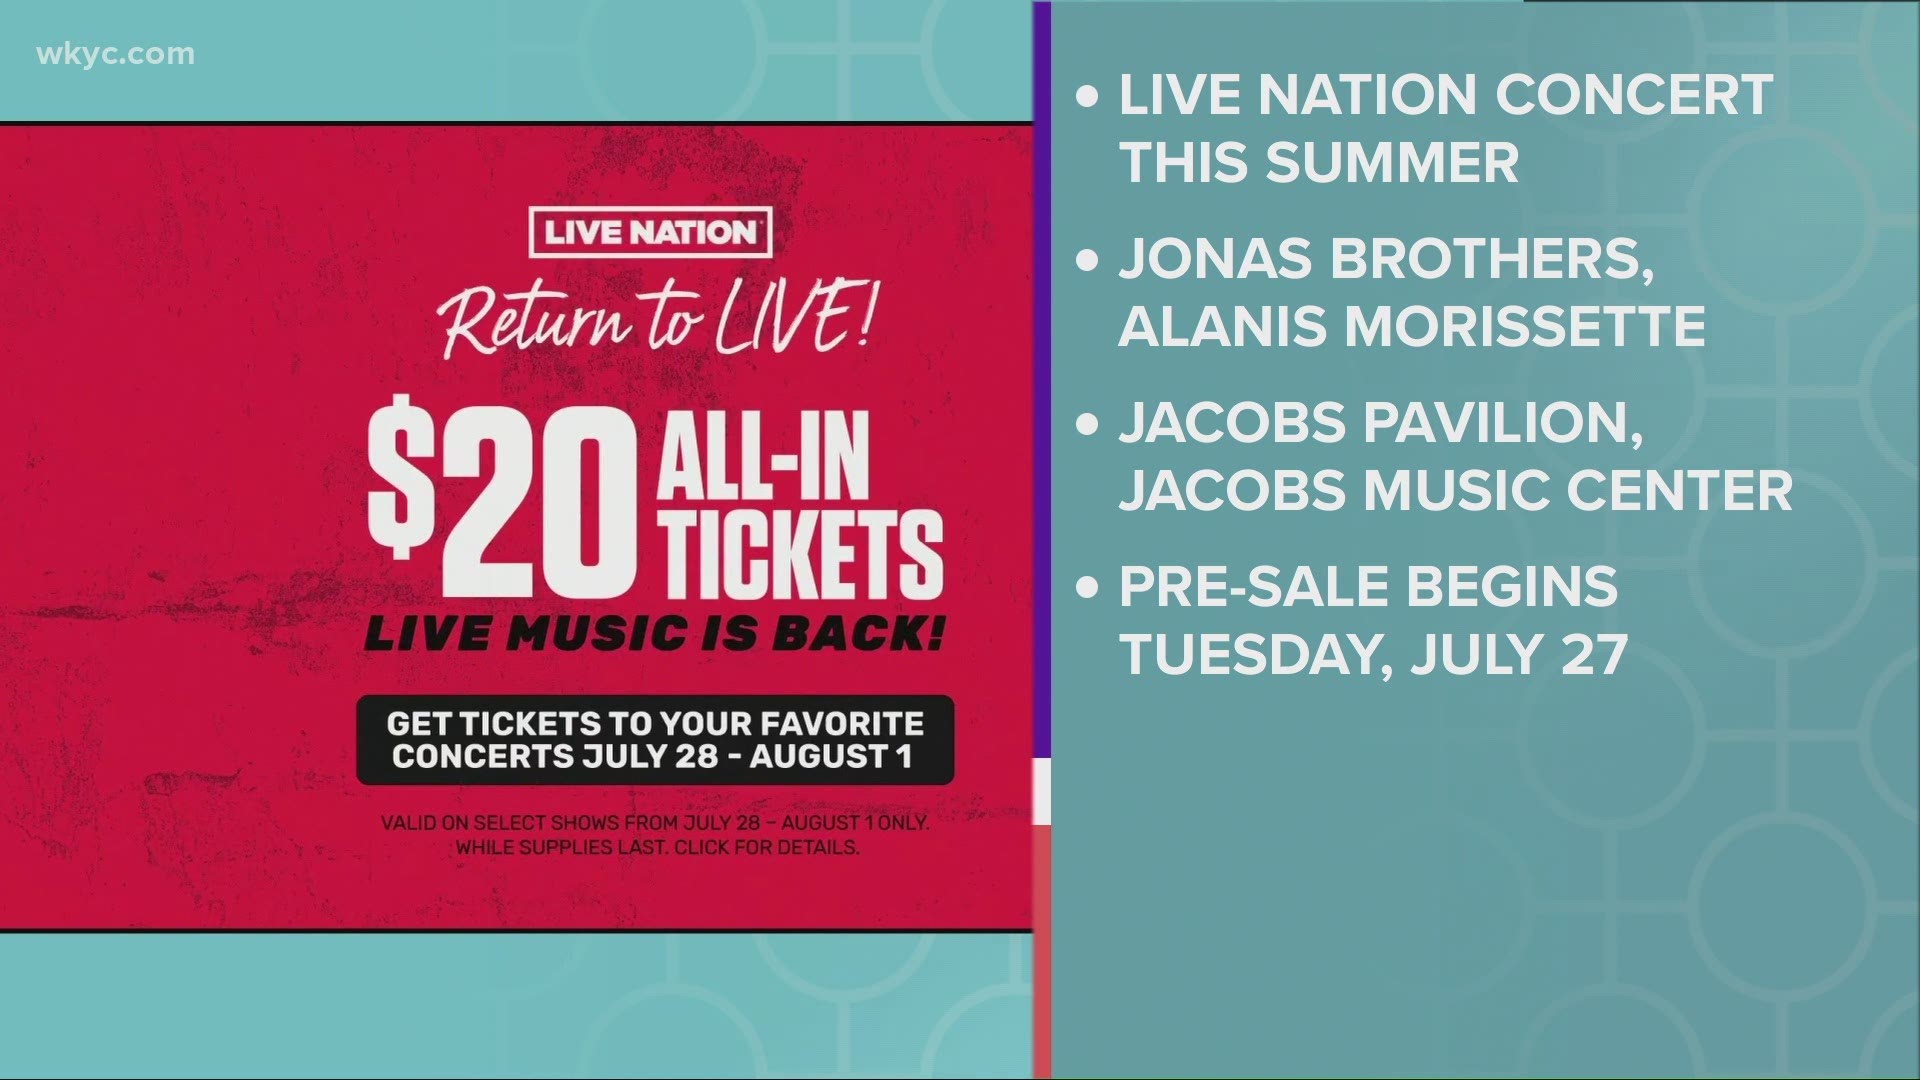 To celebrate a return to in-person concerts, Live Nation is offering a huge ticket deal. You can get $20 all-in tickets to almost 1,000 different shows!